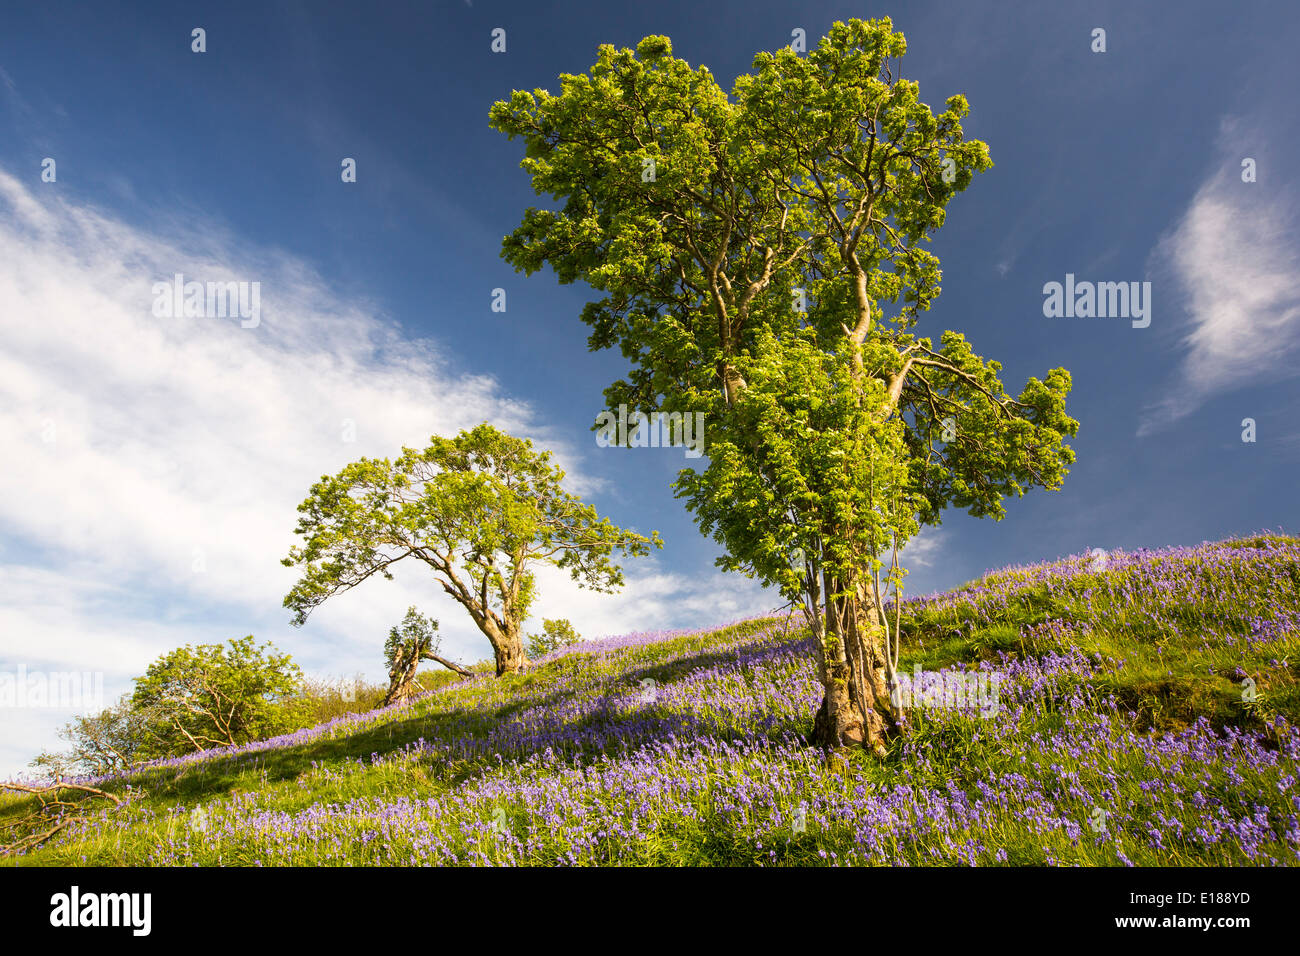 Bluebells growing on a limestone hill in the Yorkshire Dales National Park, UK, with Rowan trees Stock Photo